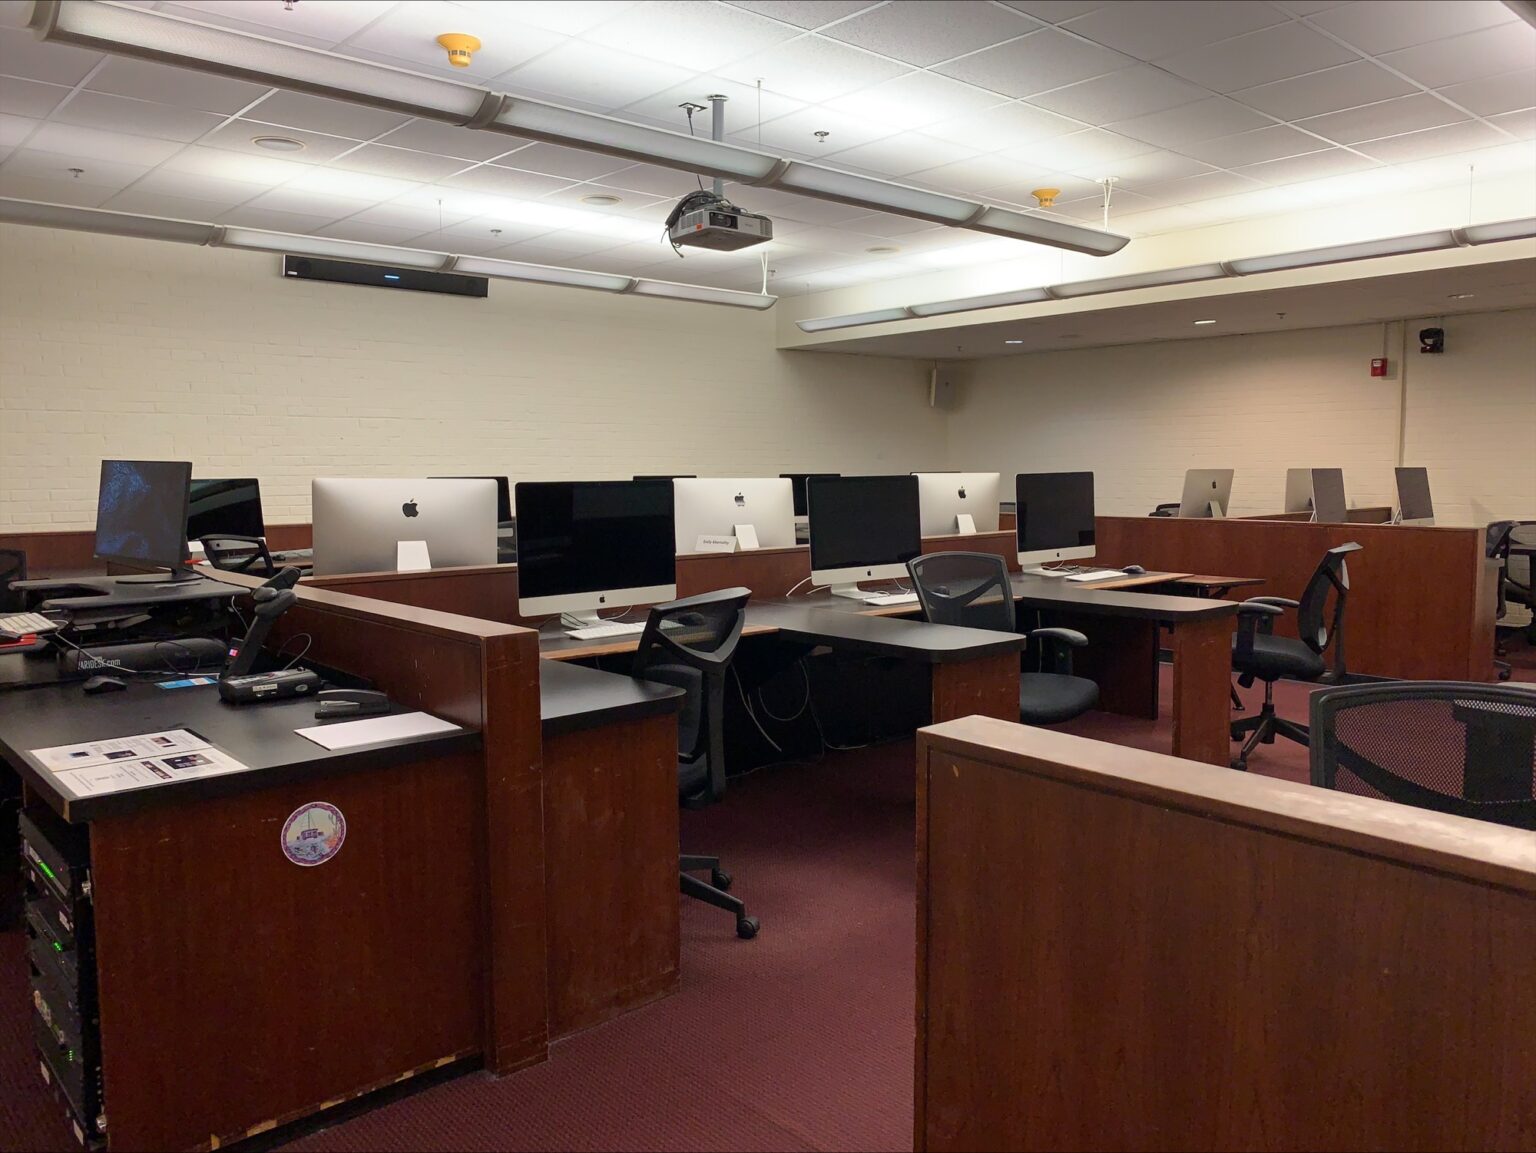 Alternate perspective of Carroll 060, with wooden desks and Mac monitors.